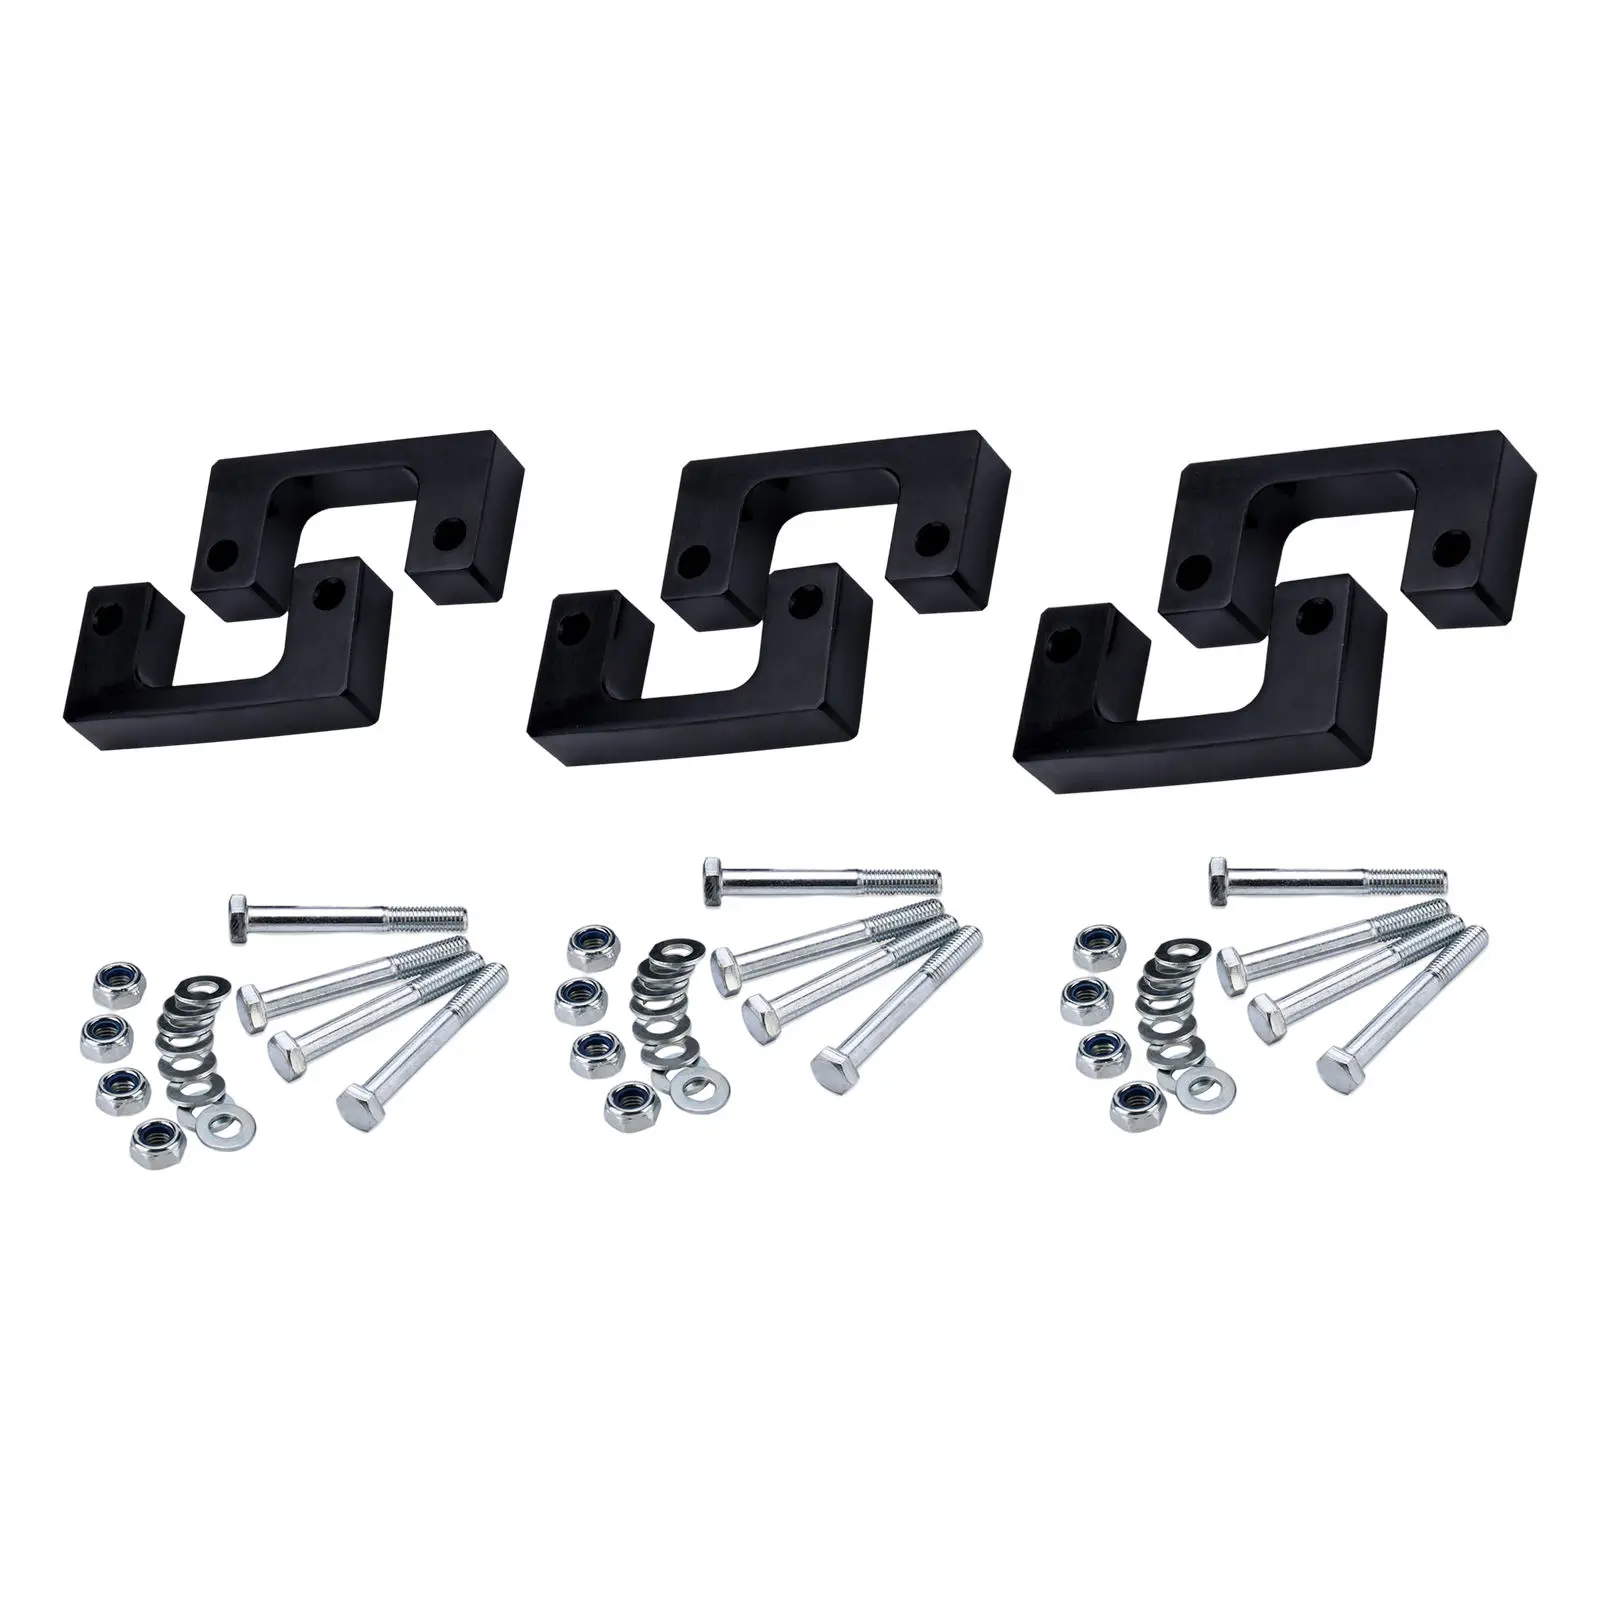 Front Leveling Lift Kit Replacement Front Lift Spacers for Chevy Silverado for GMC Sierra for GM 1500 2007-2019